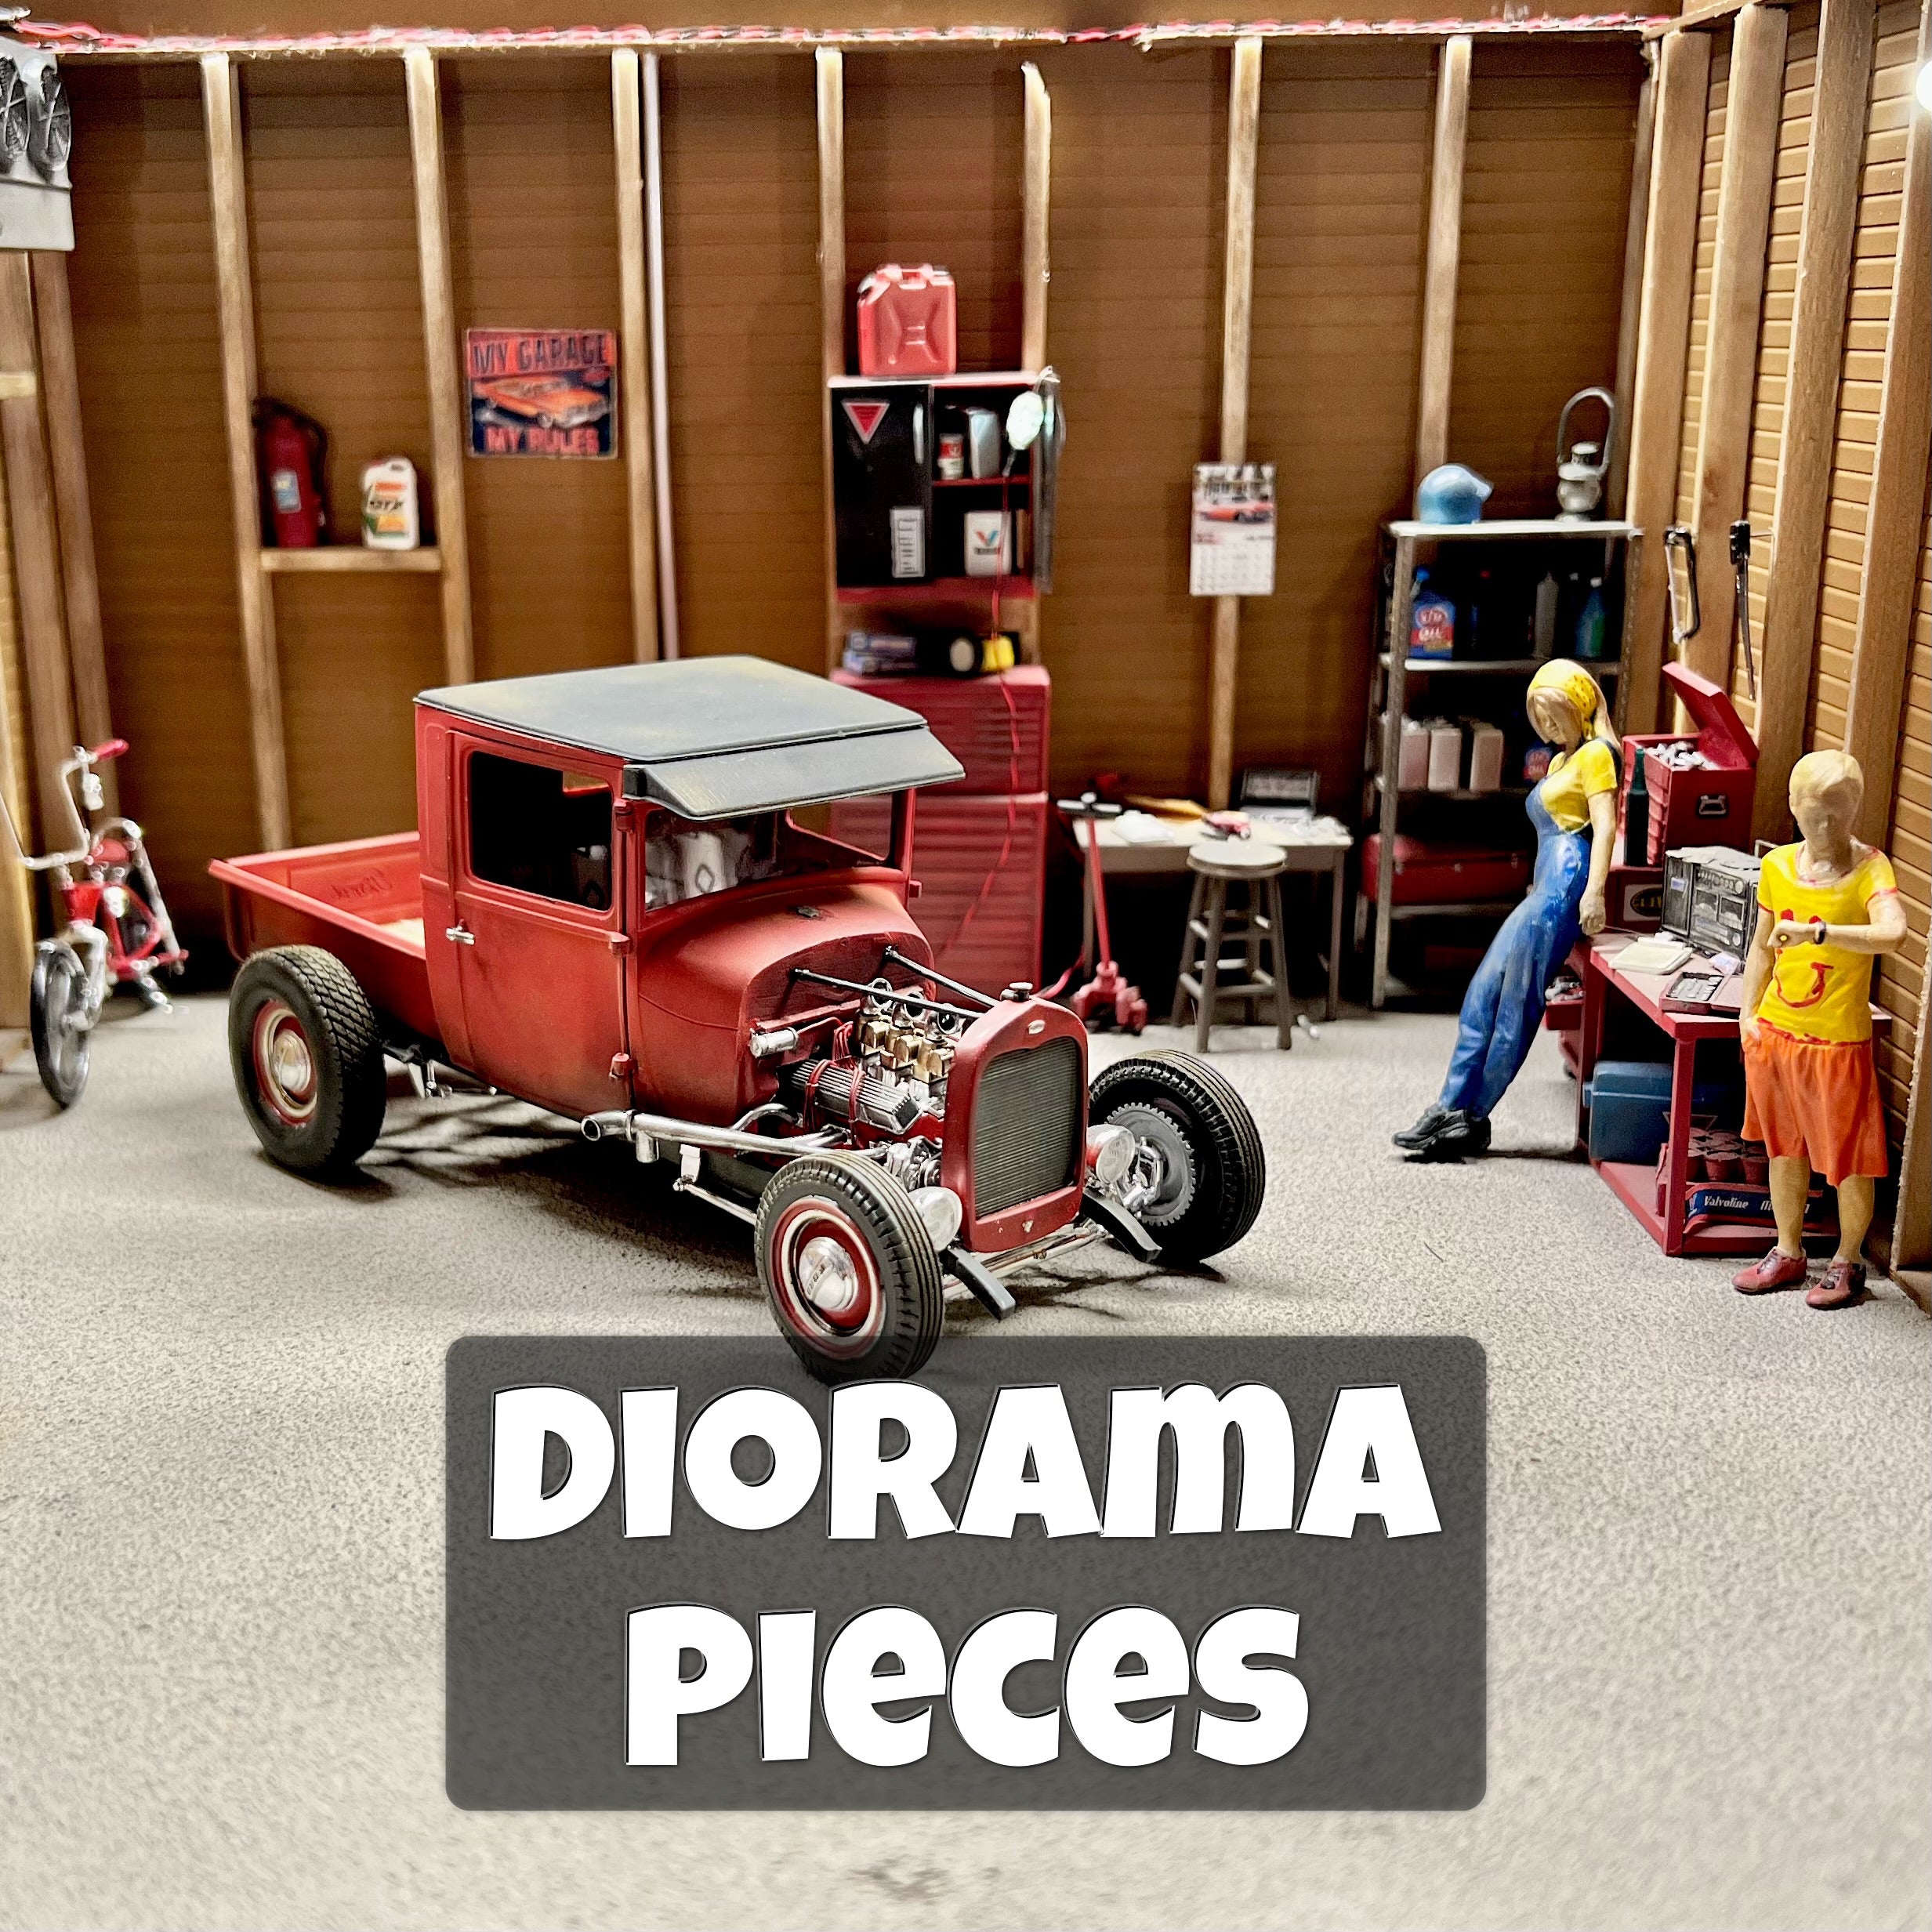 Diorama Pieces – IcemanCollections